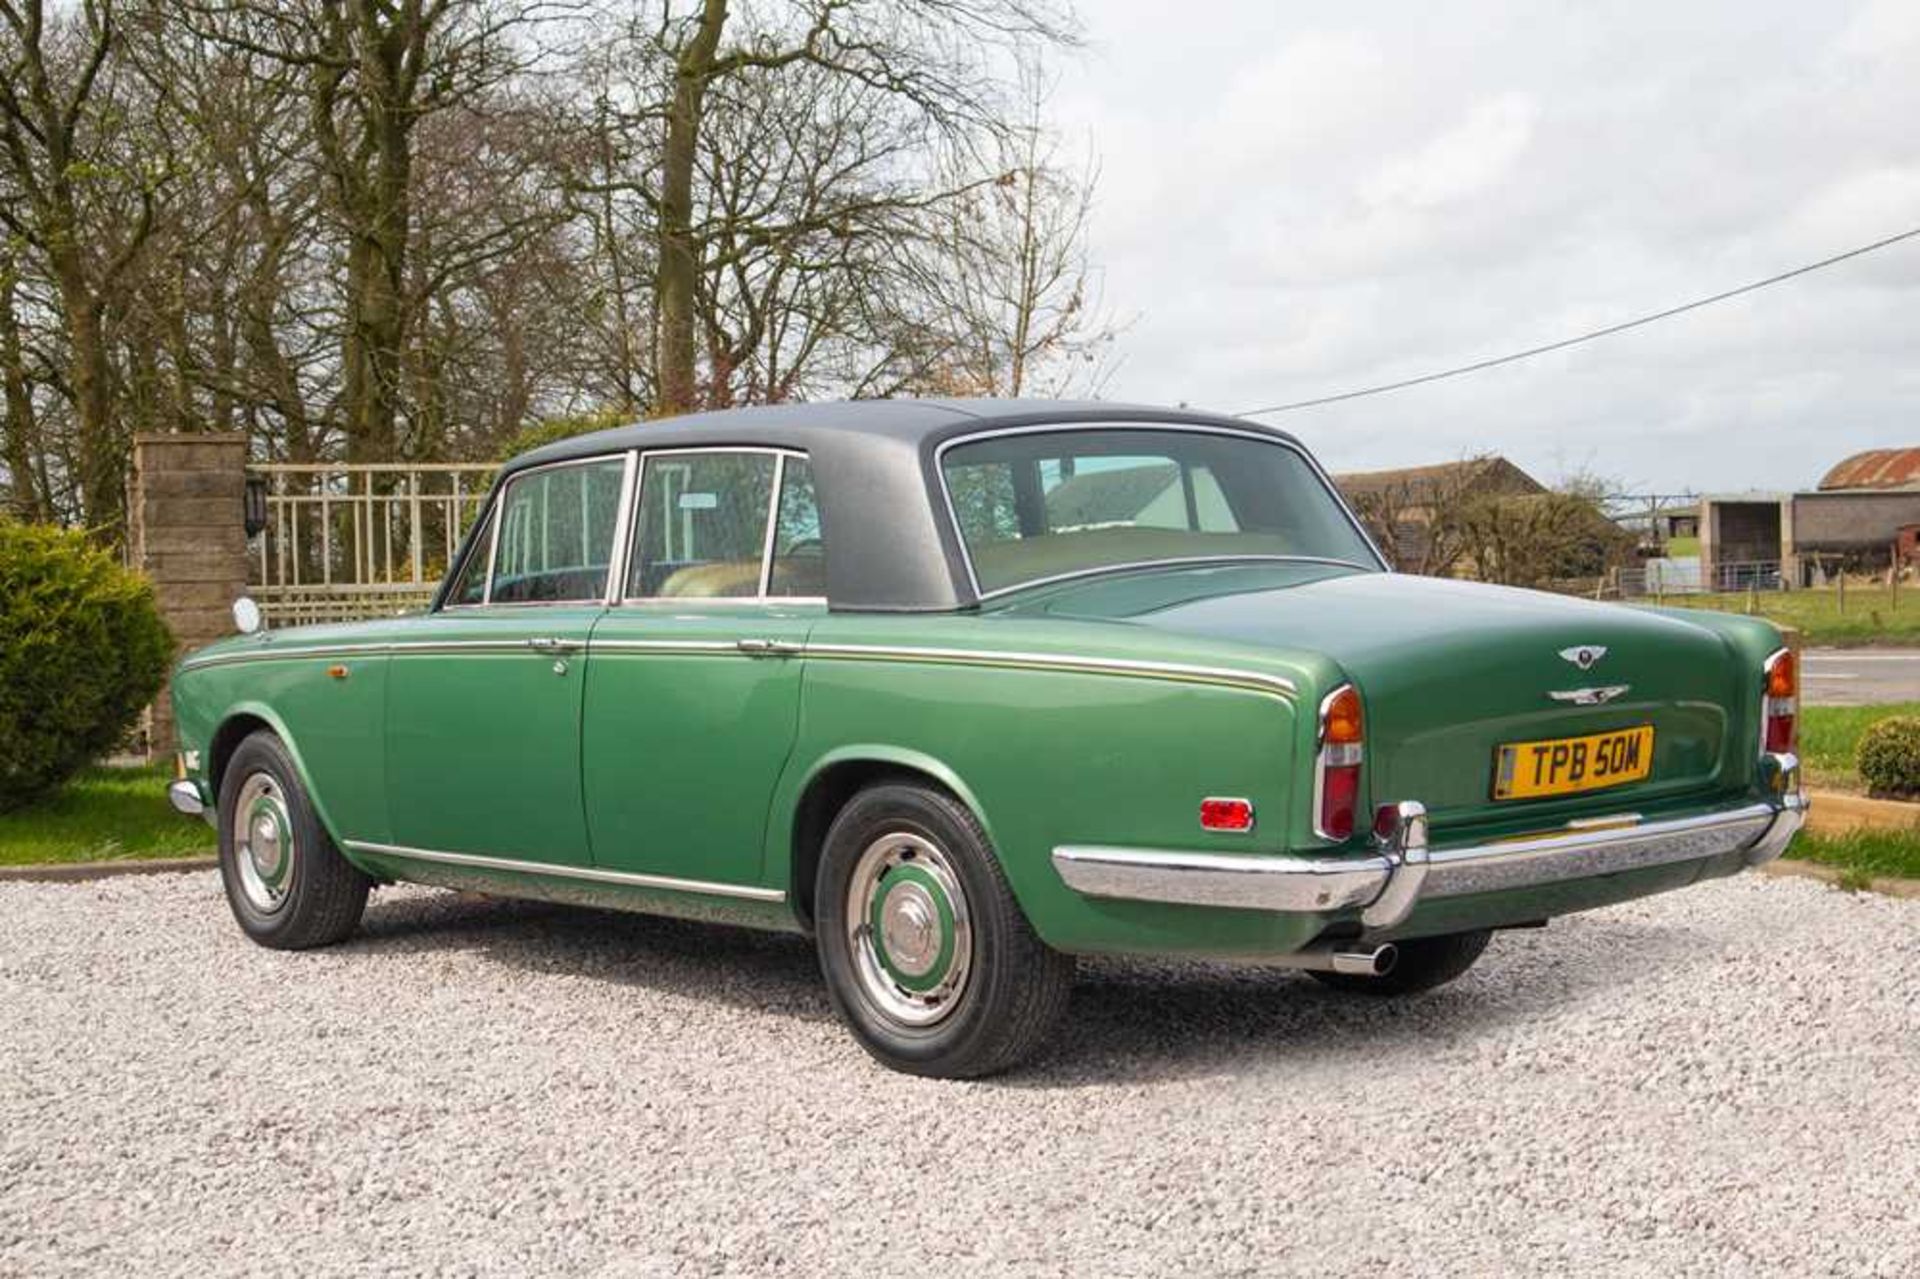 1973 Bentley T-Series Saloon Formerly part of the Dr James Hull and Jaguar Land Rover collections - Image 3 of 22